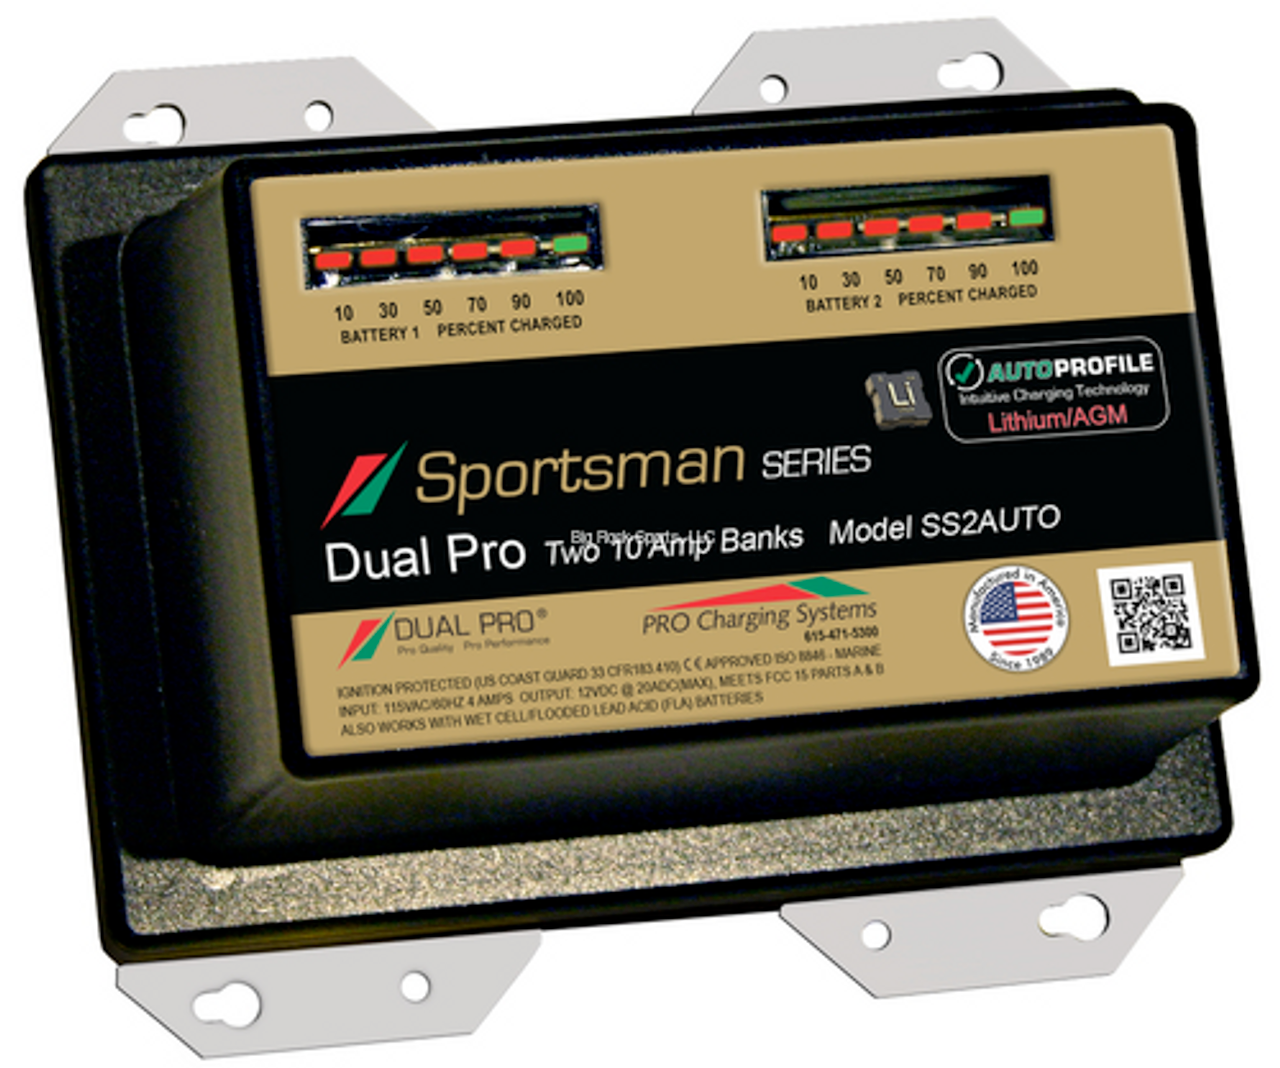 Dual PRO DualPro Sportsman Series Lithium/ Agm, Two Bank 12V/ 10A Sealed Waterproof Charger